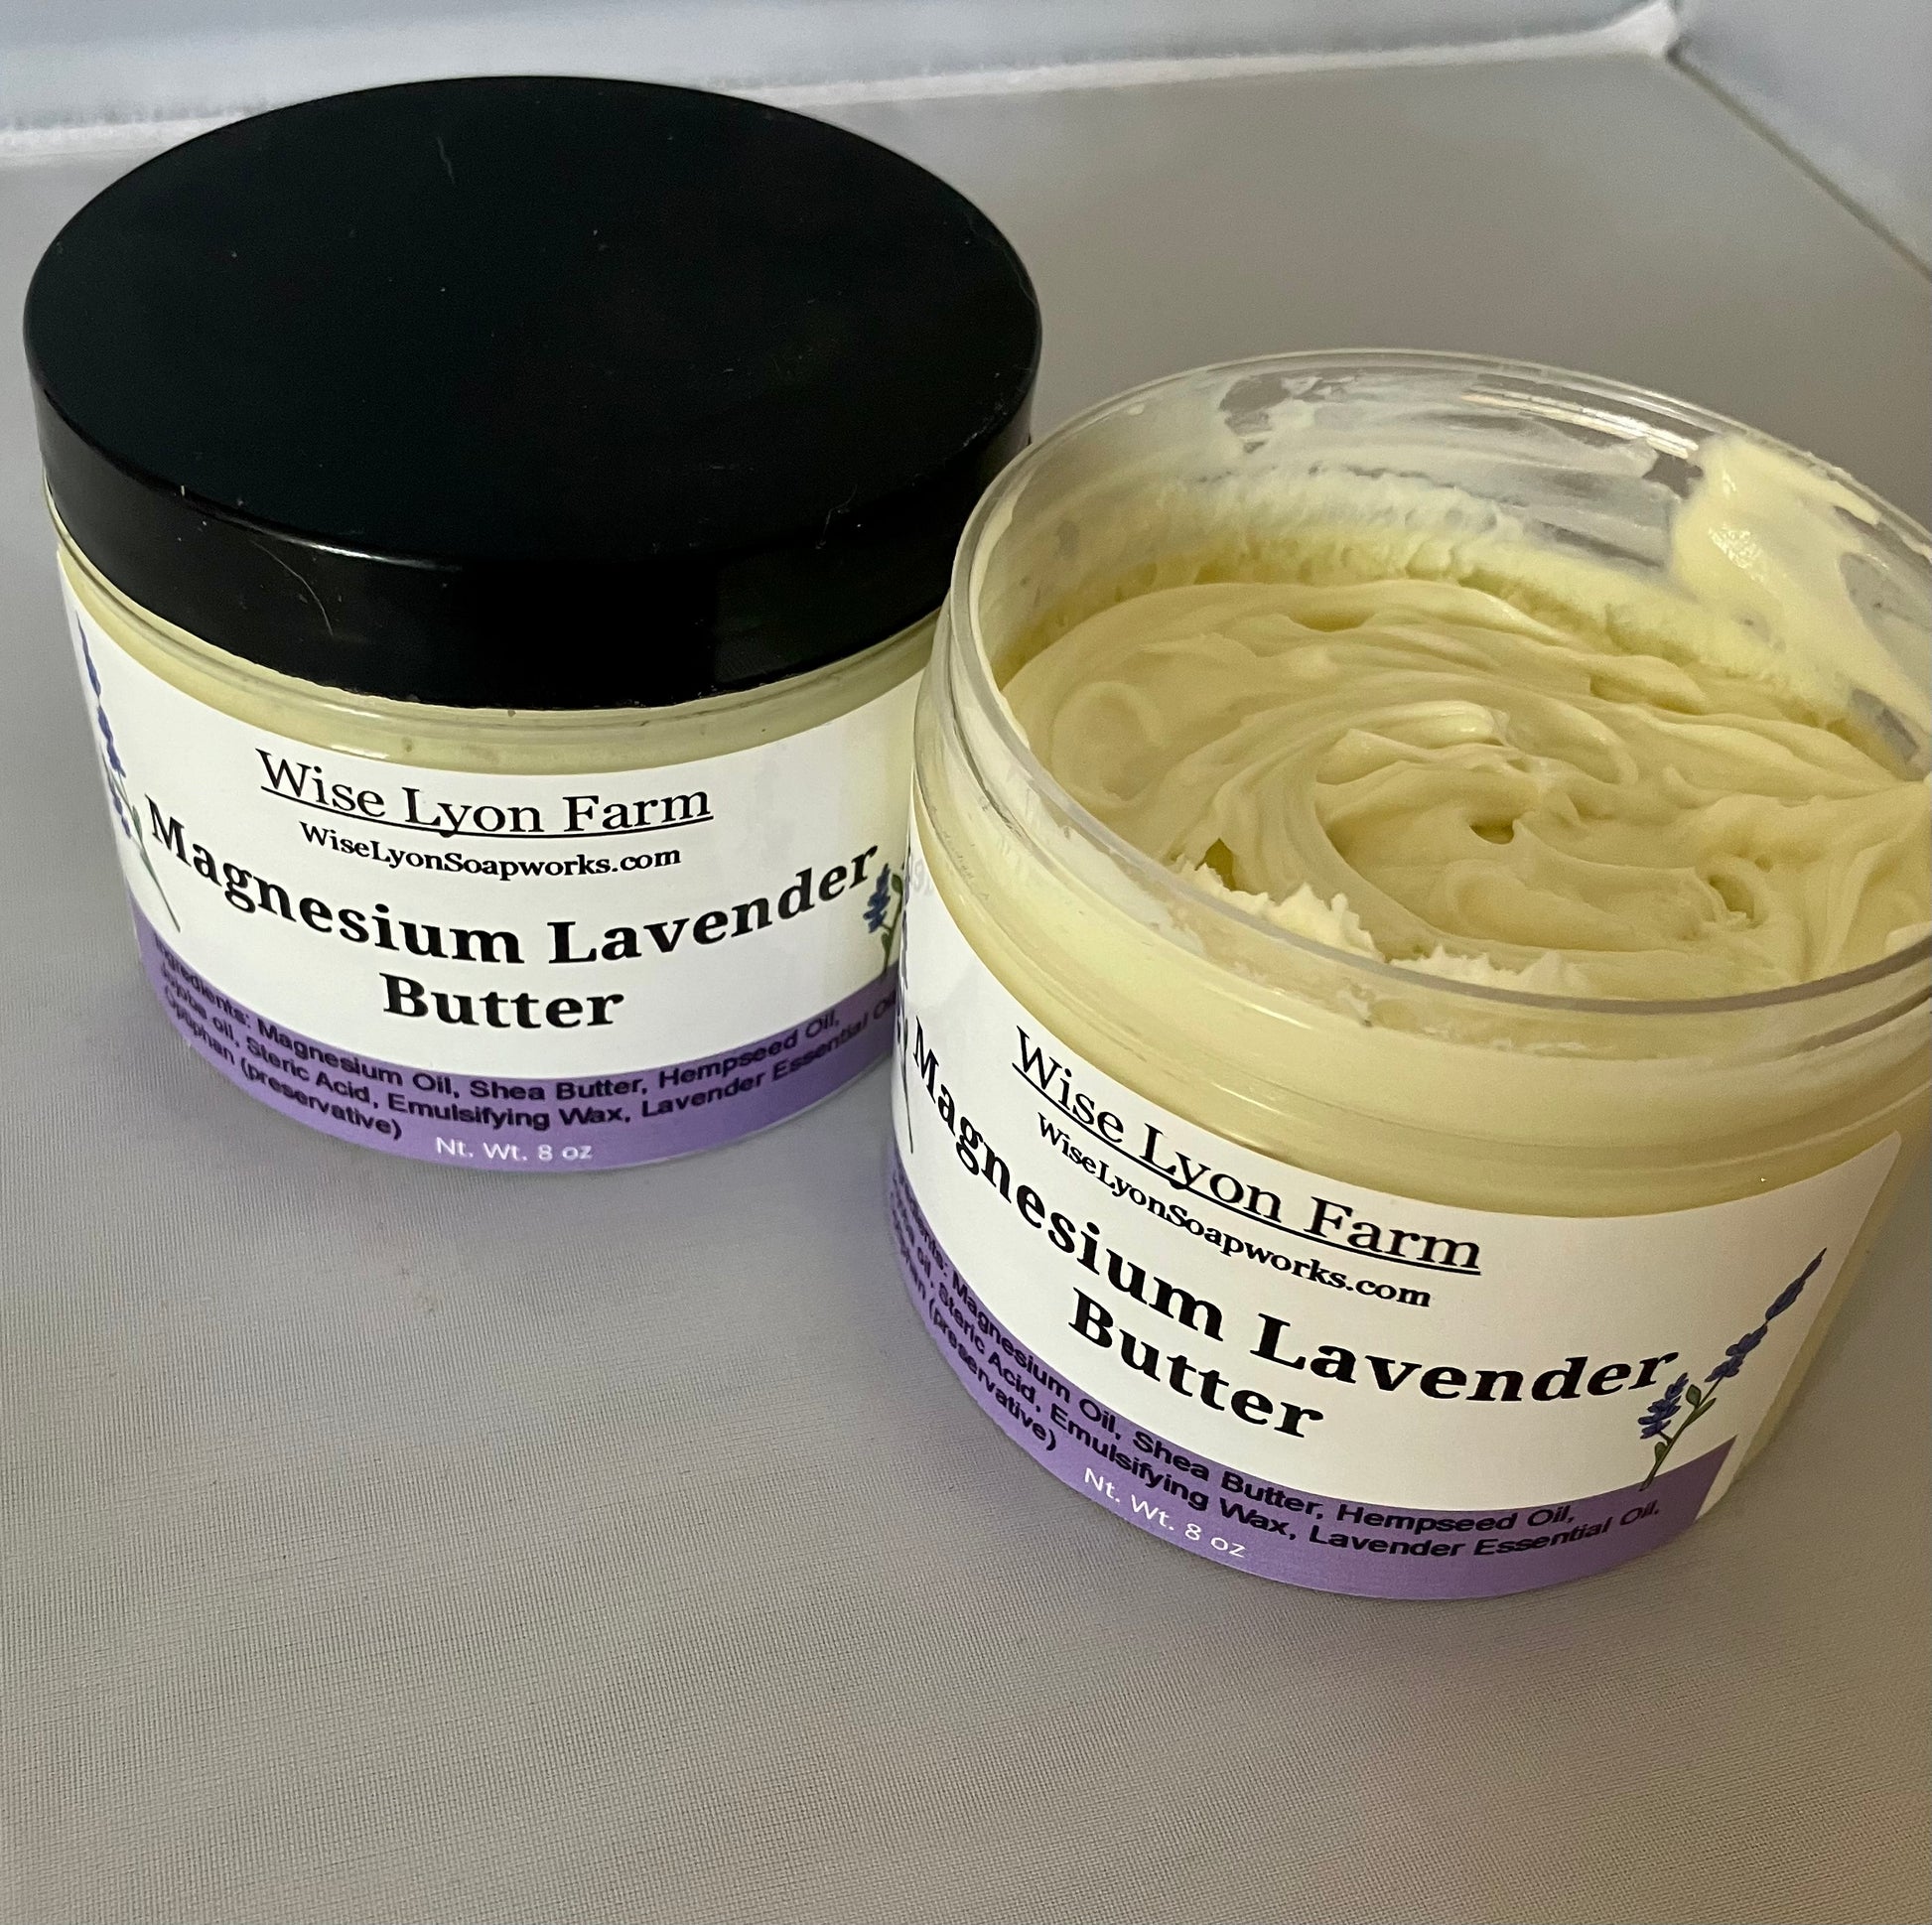 Magnesium & Lavender Muscle Balm - Wiselyonsoapworks